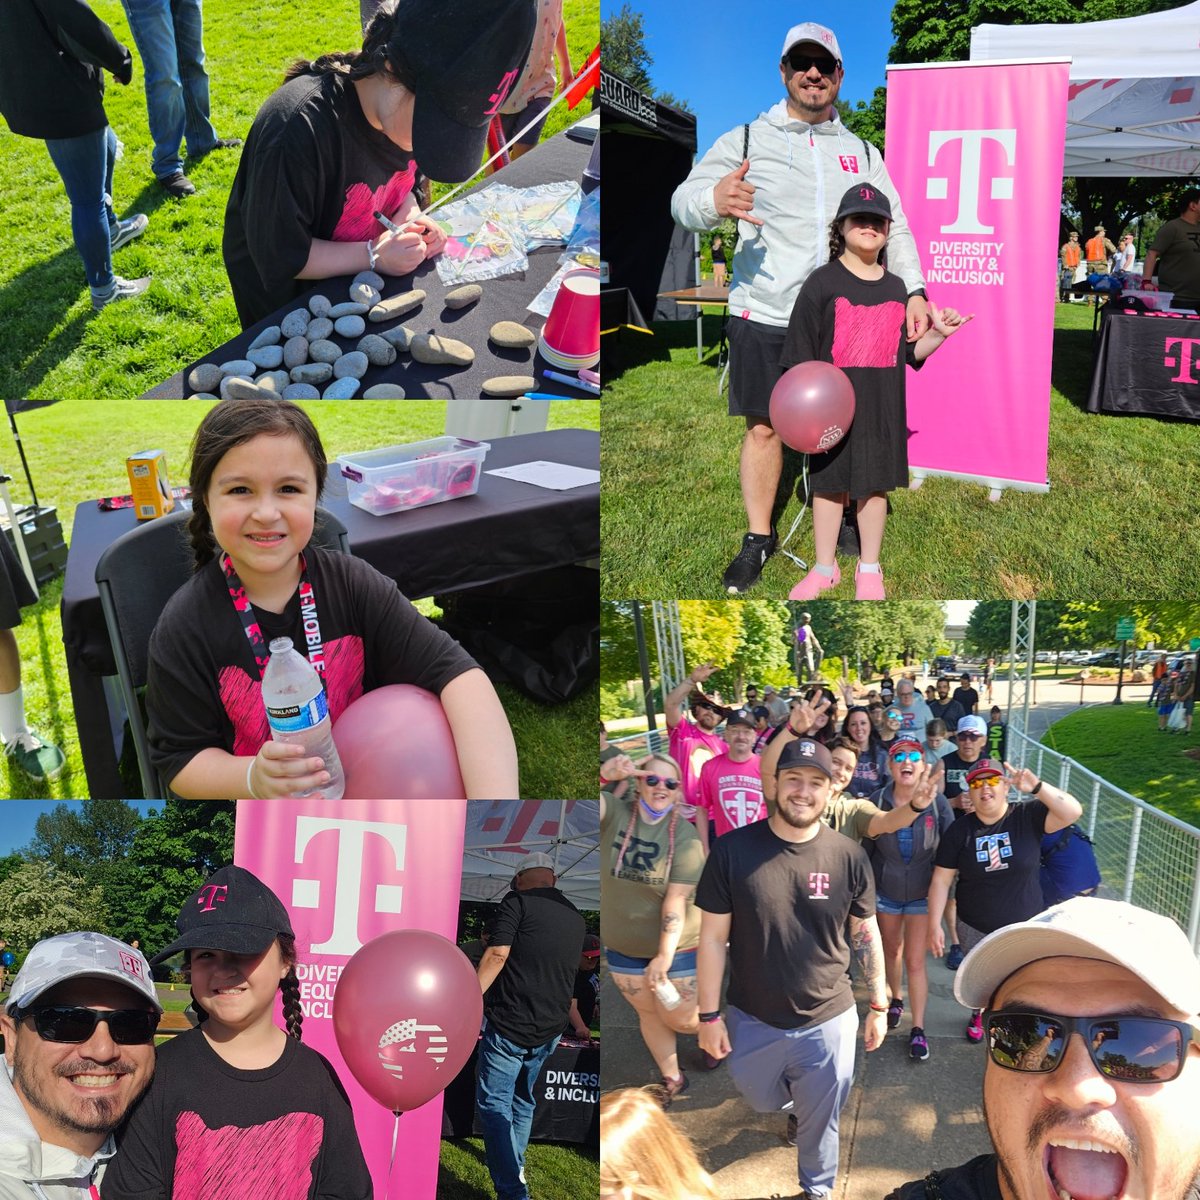 The @TMobile #OregonDEIChapter helped with the #RunToRememberSalem 5K Walk/Run event. Awesome getting to support this cause and remember our fallen service members. Thank you to the VAN ERG Leads and DEI Lead @CaptKitKatt for getting T-Mobile involved. #Run2Remember #AreYouWithUs